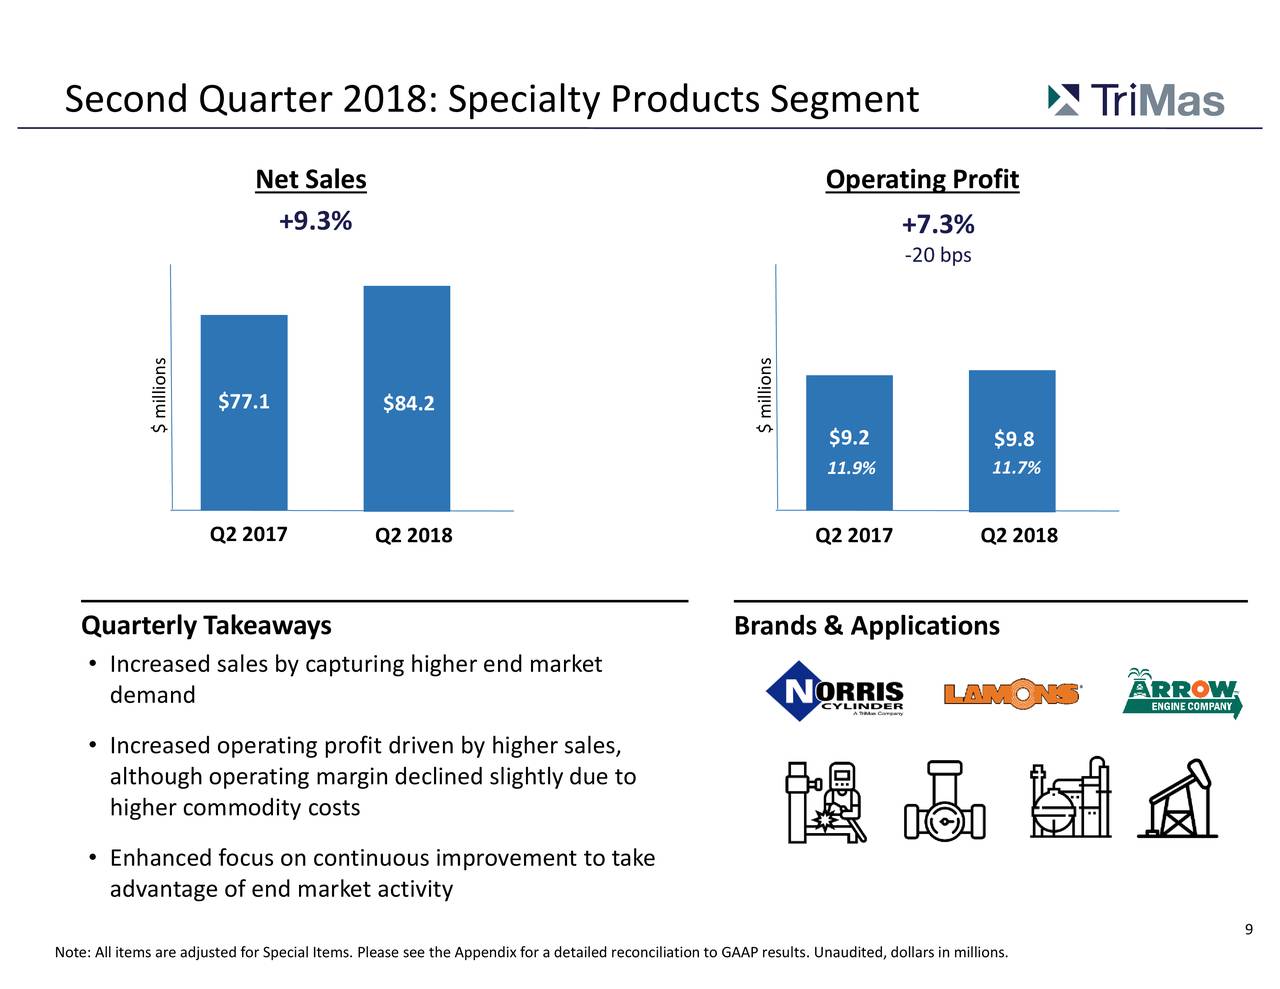 Second Quarter 2018: Specialty Products Segment